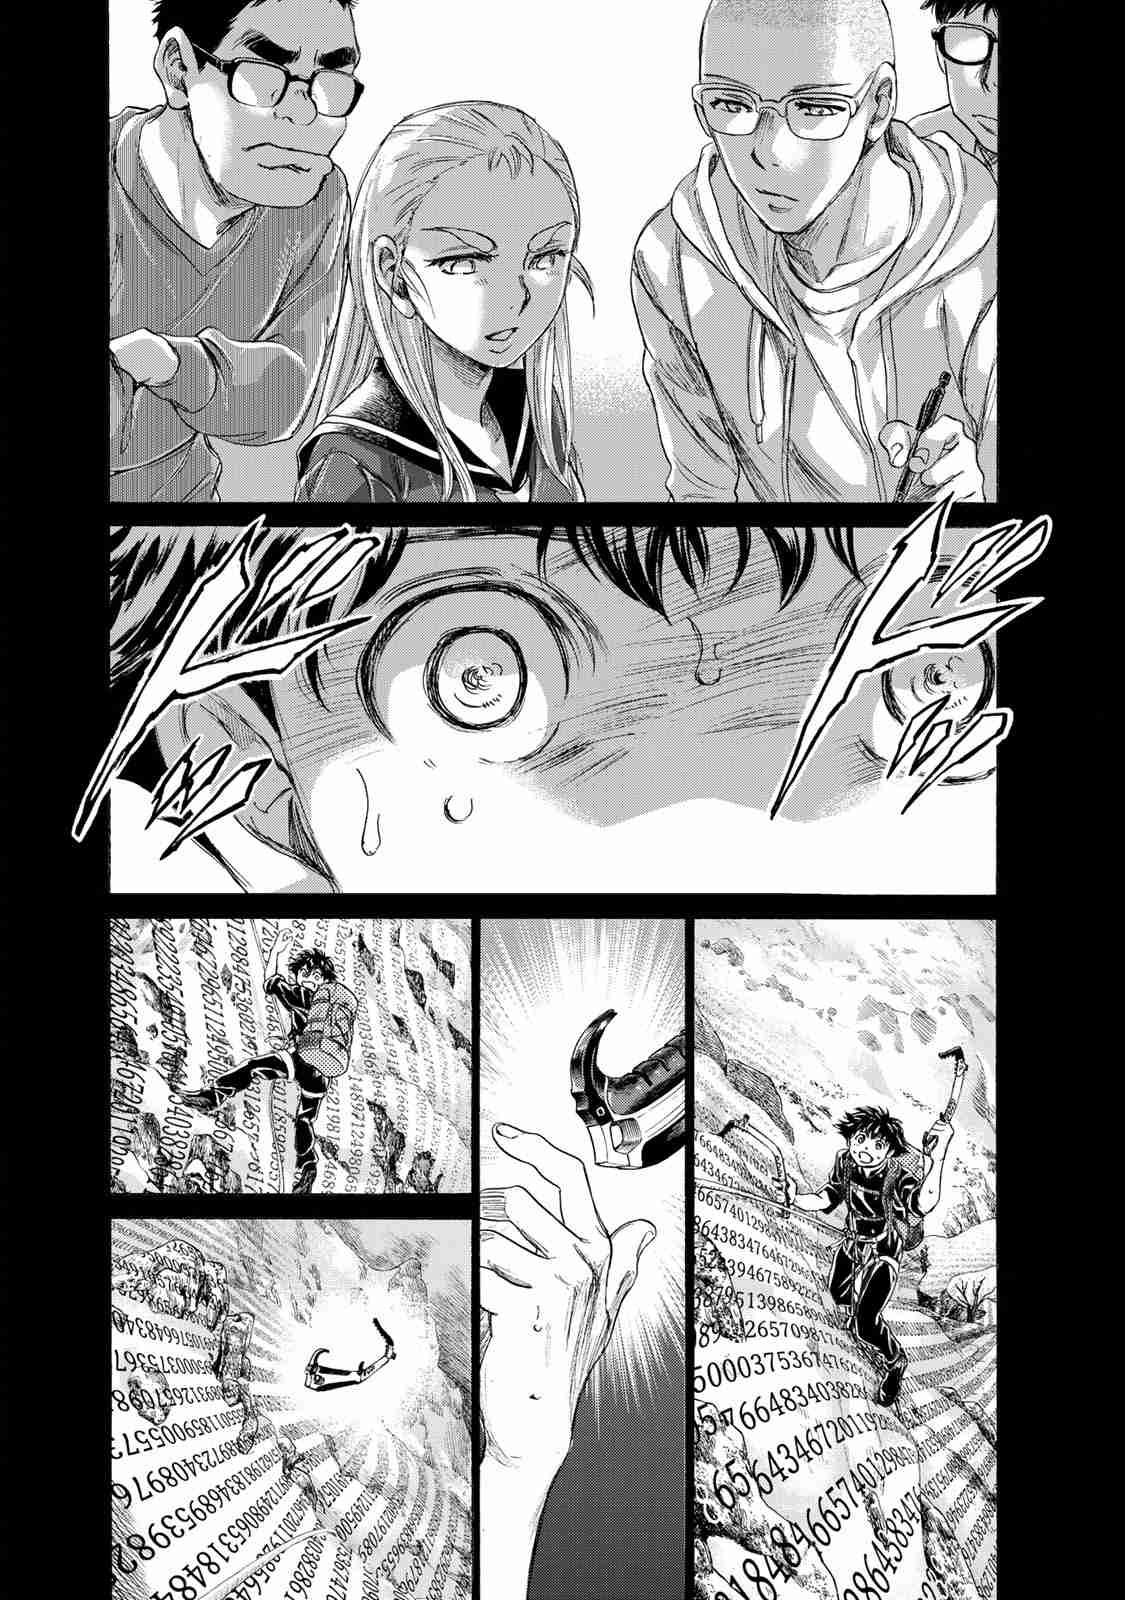 Fermat no Ryouri Vol. 1 Ch. 4 Food as a Challenge to the Gods